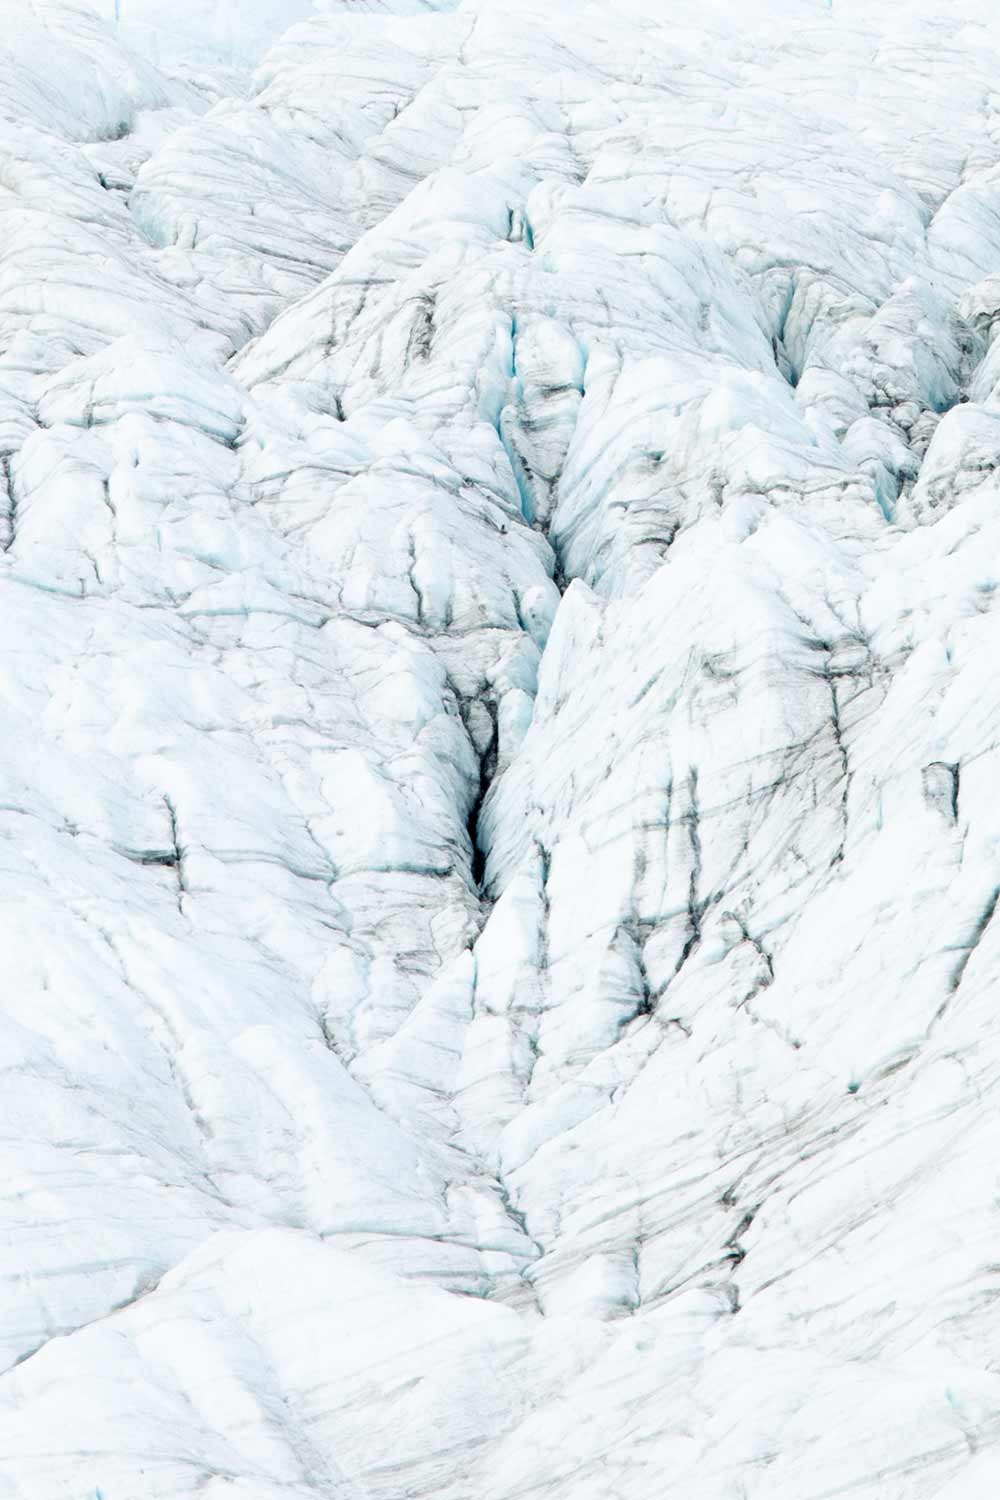 Mesmerizing views of Greenland's Ice Cap in the summer landscape